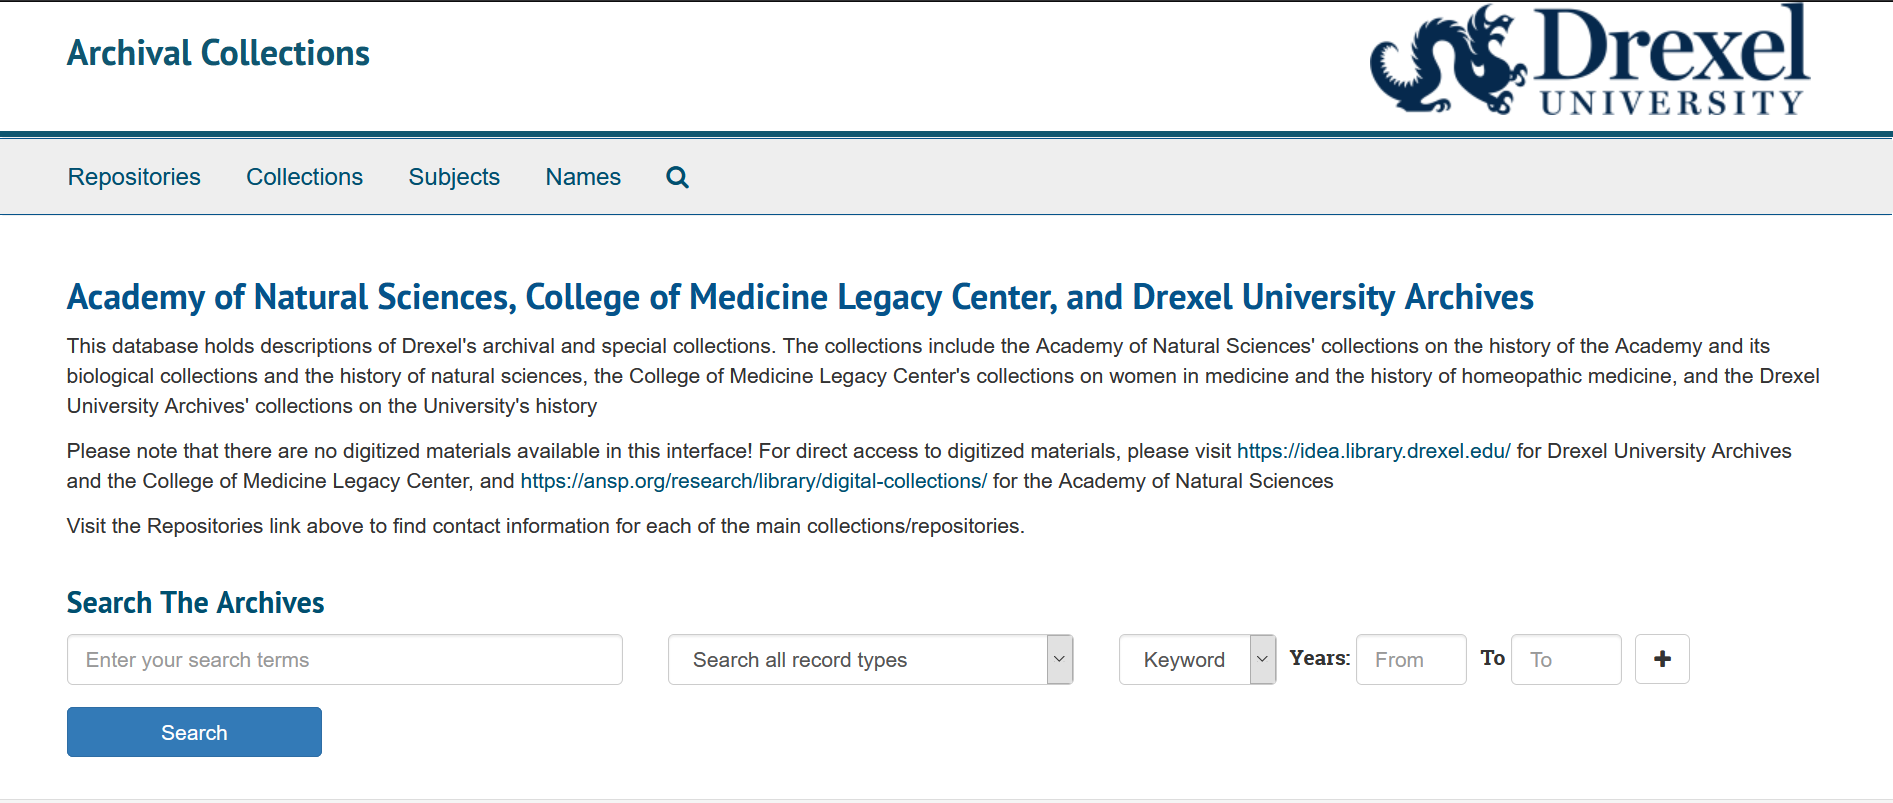 A screenshot of the new Drexel Archival Collections Database.